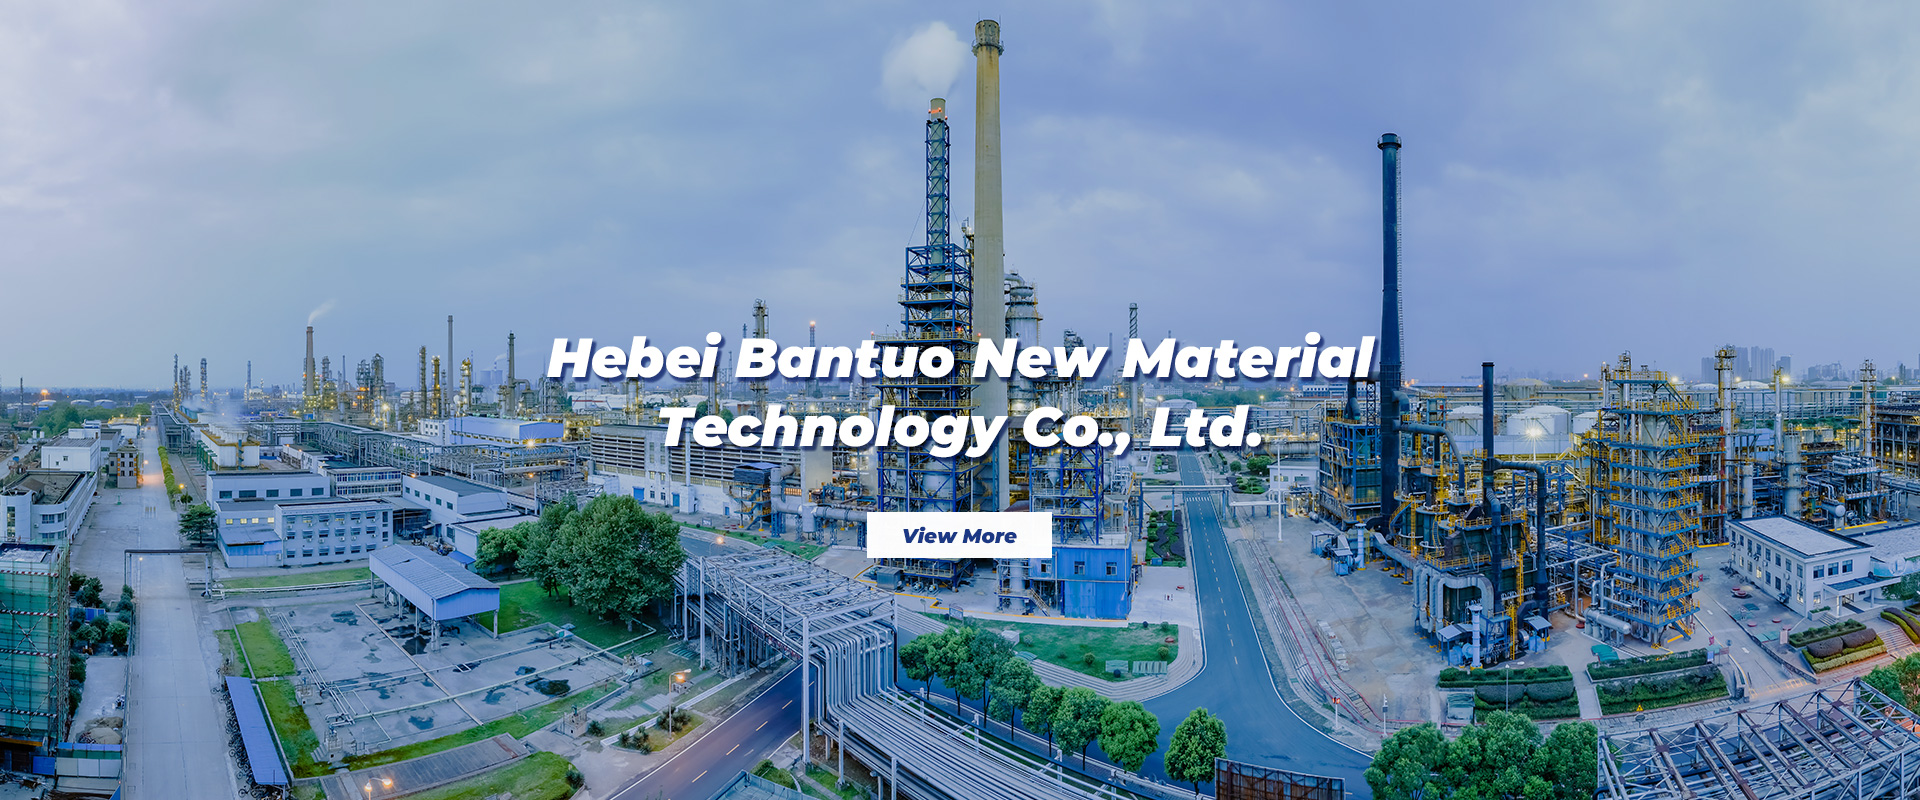 Hebei Bantuo New Material Technology Co., Ltd.